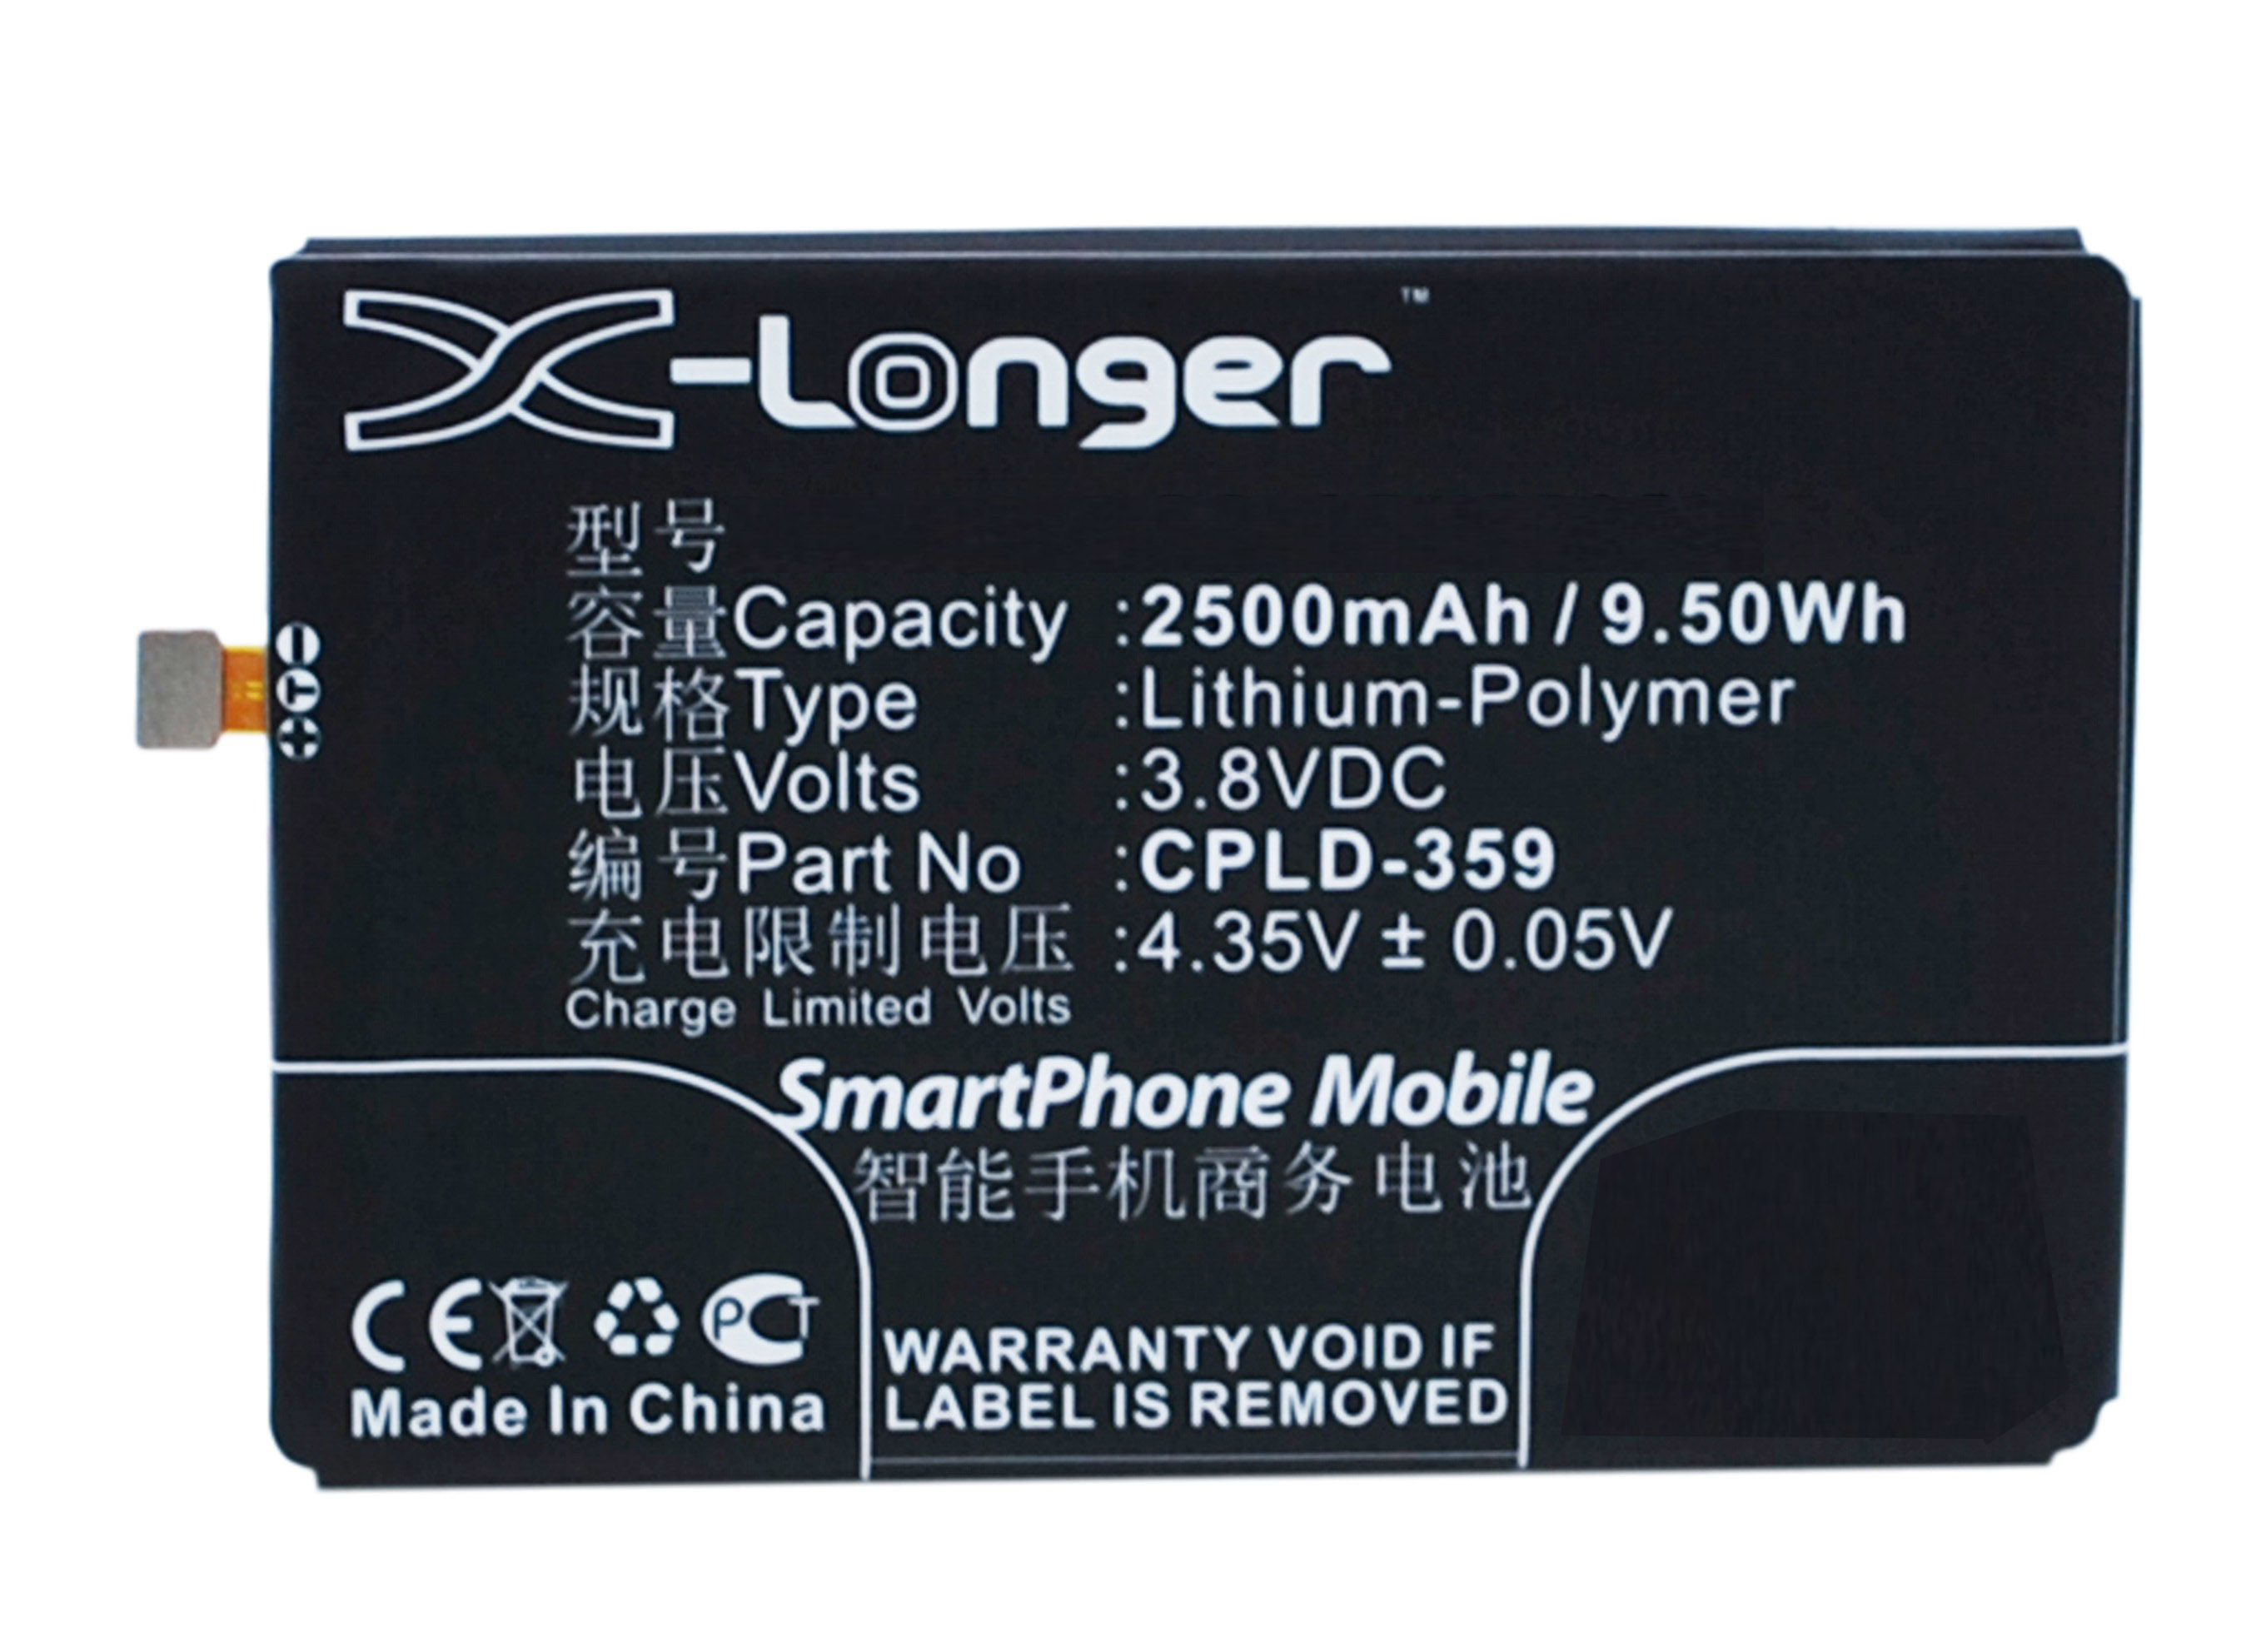 Synergy Digital Battery Compatible With Coolpad CPLD-359 Cellphone Battery - (Li-Pol, 3.8V, 2500 mAh / 9.50Wh)